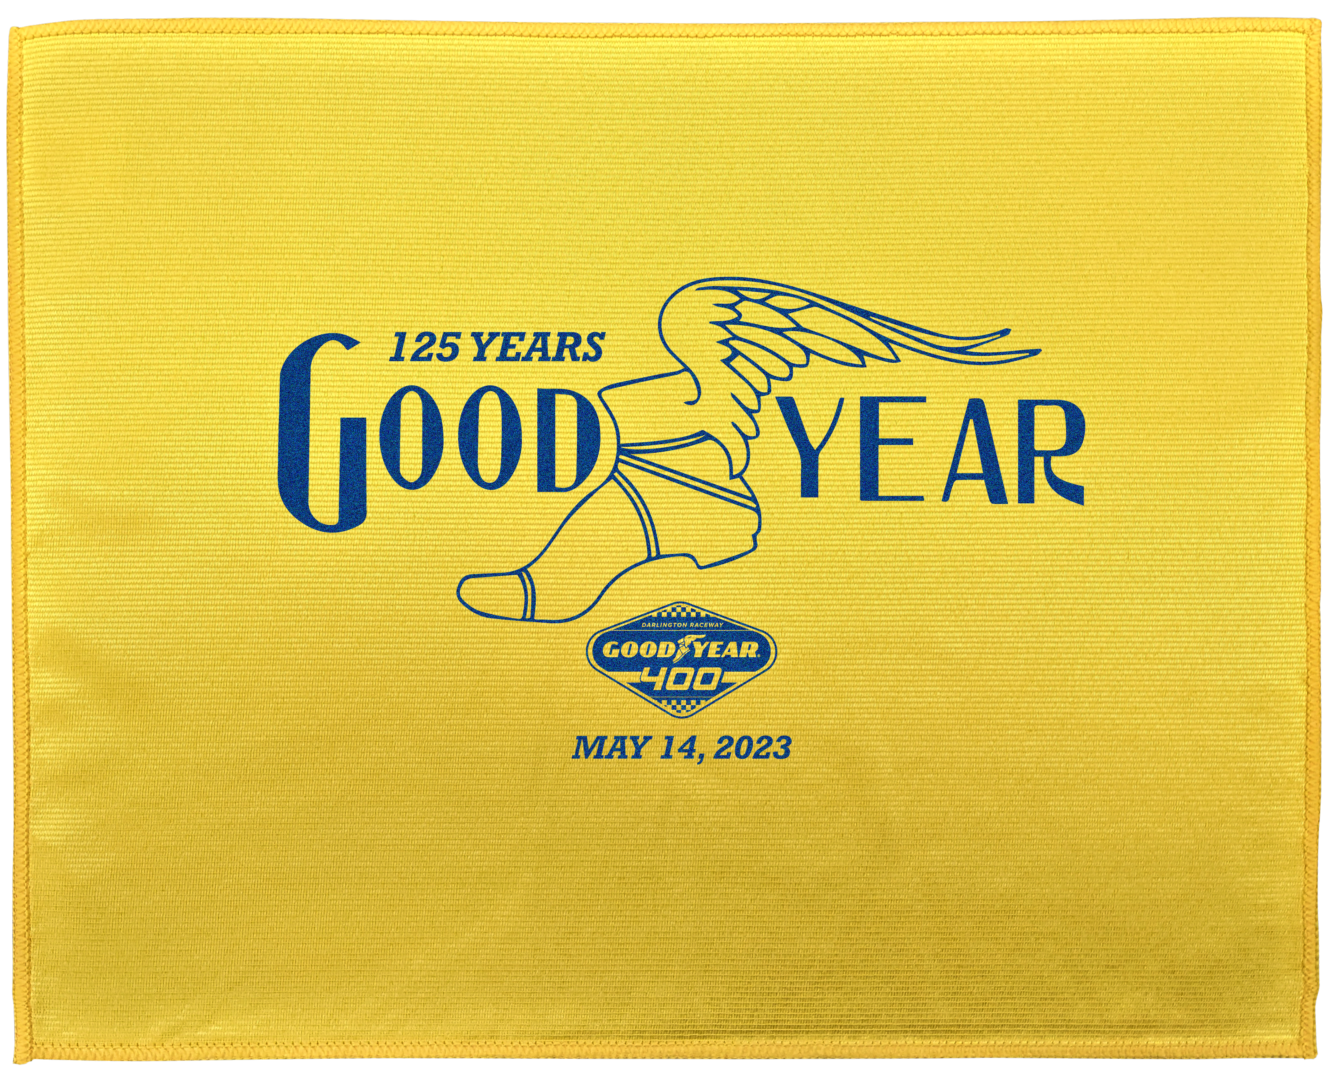 Good year text on yellow color cloth